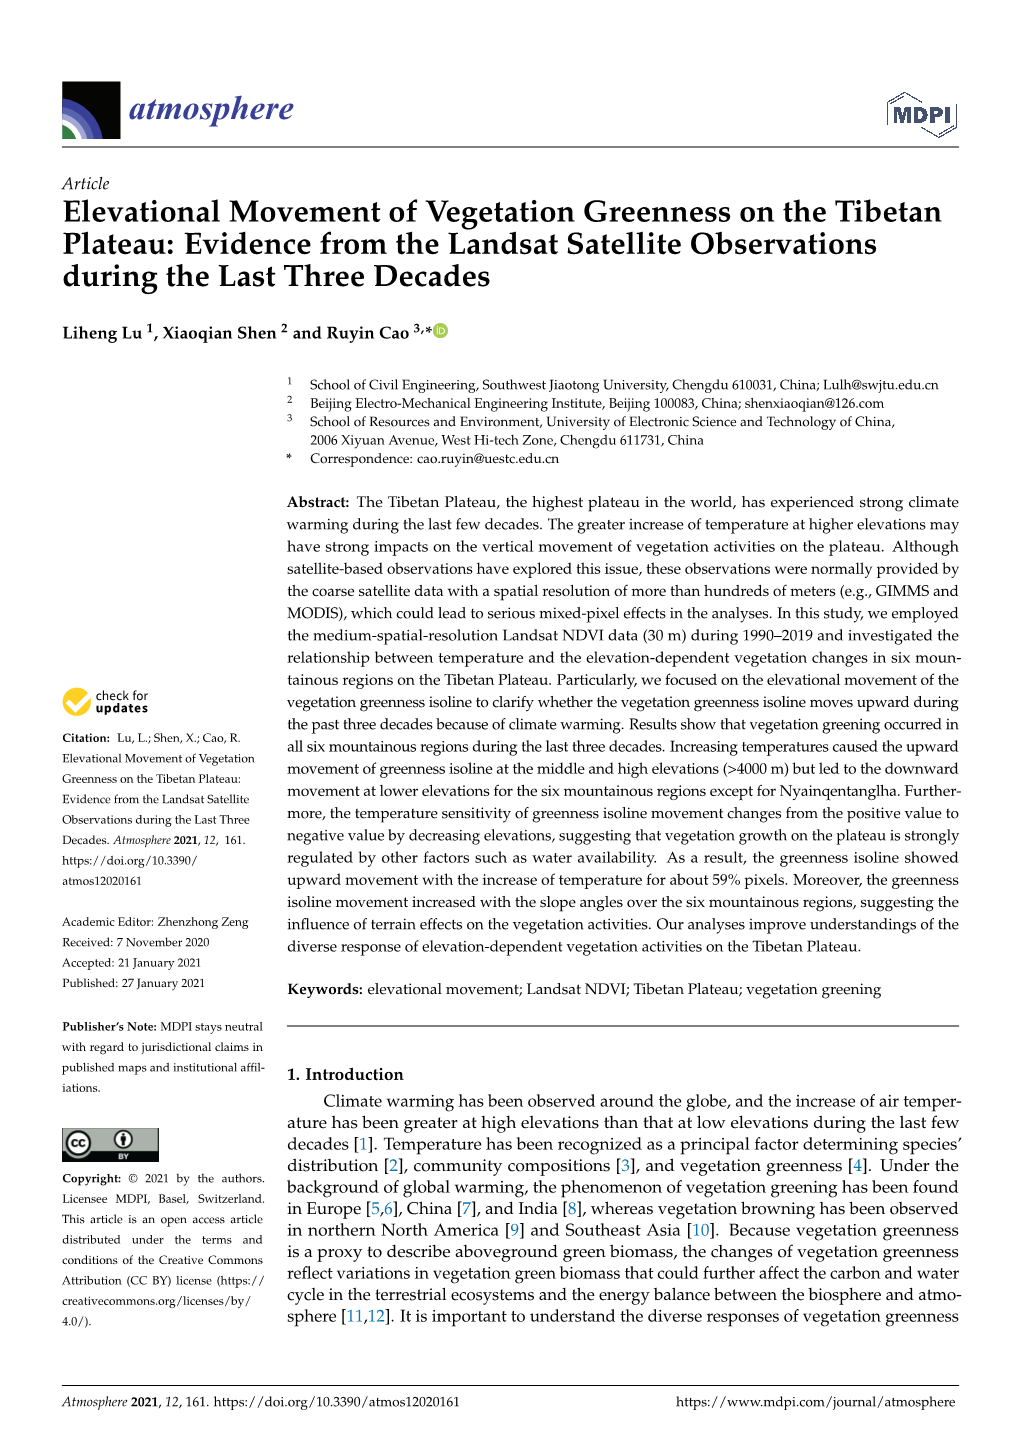 Elevational Movement of Vegetation Greenness on the Tibetan Plateau: Evidence from the Landsat Satellite Observations During the Last Three Decades